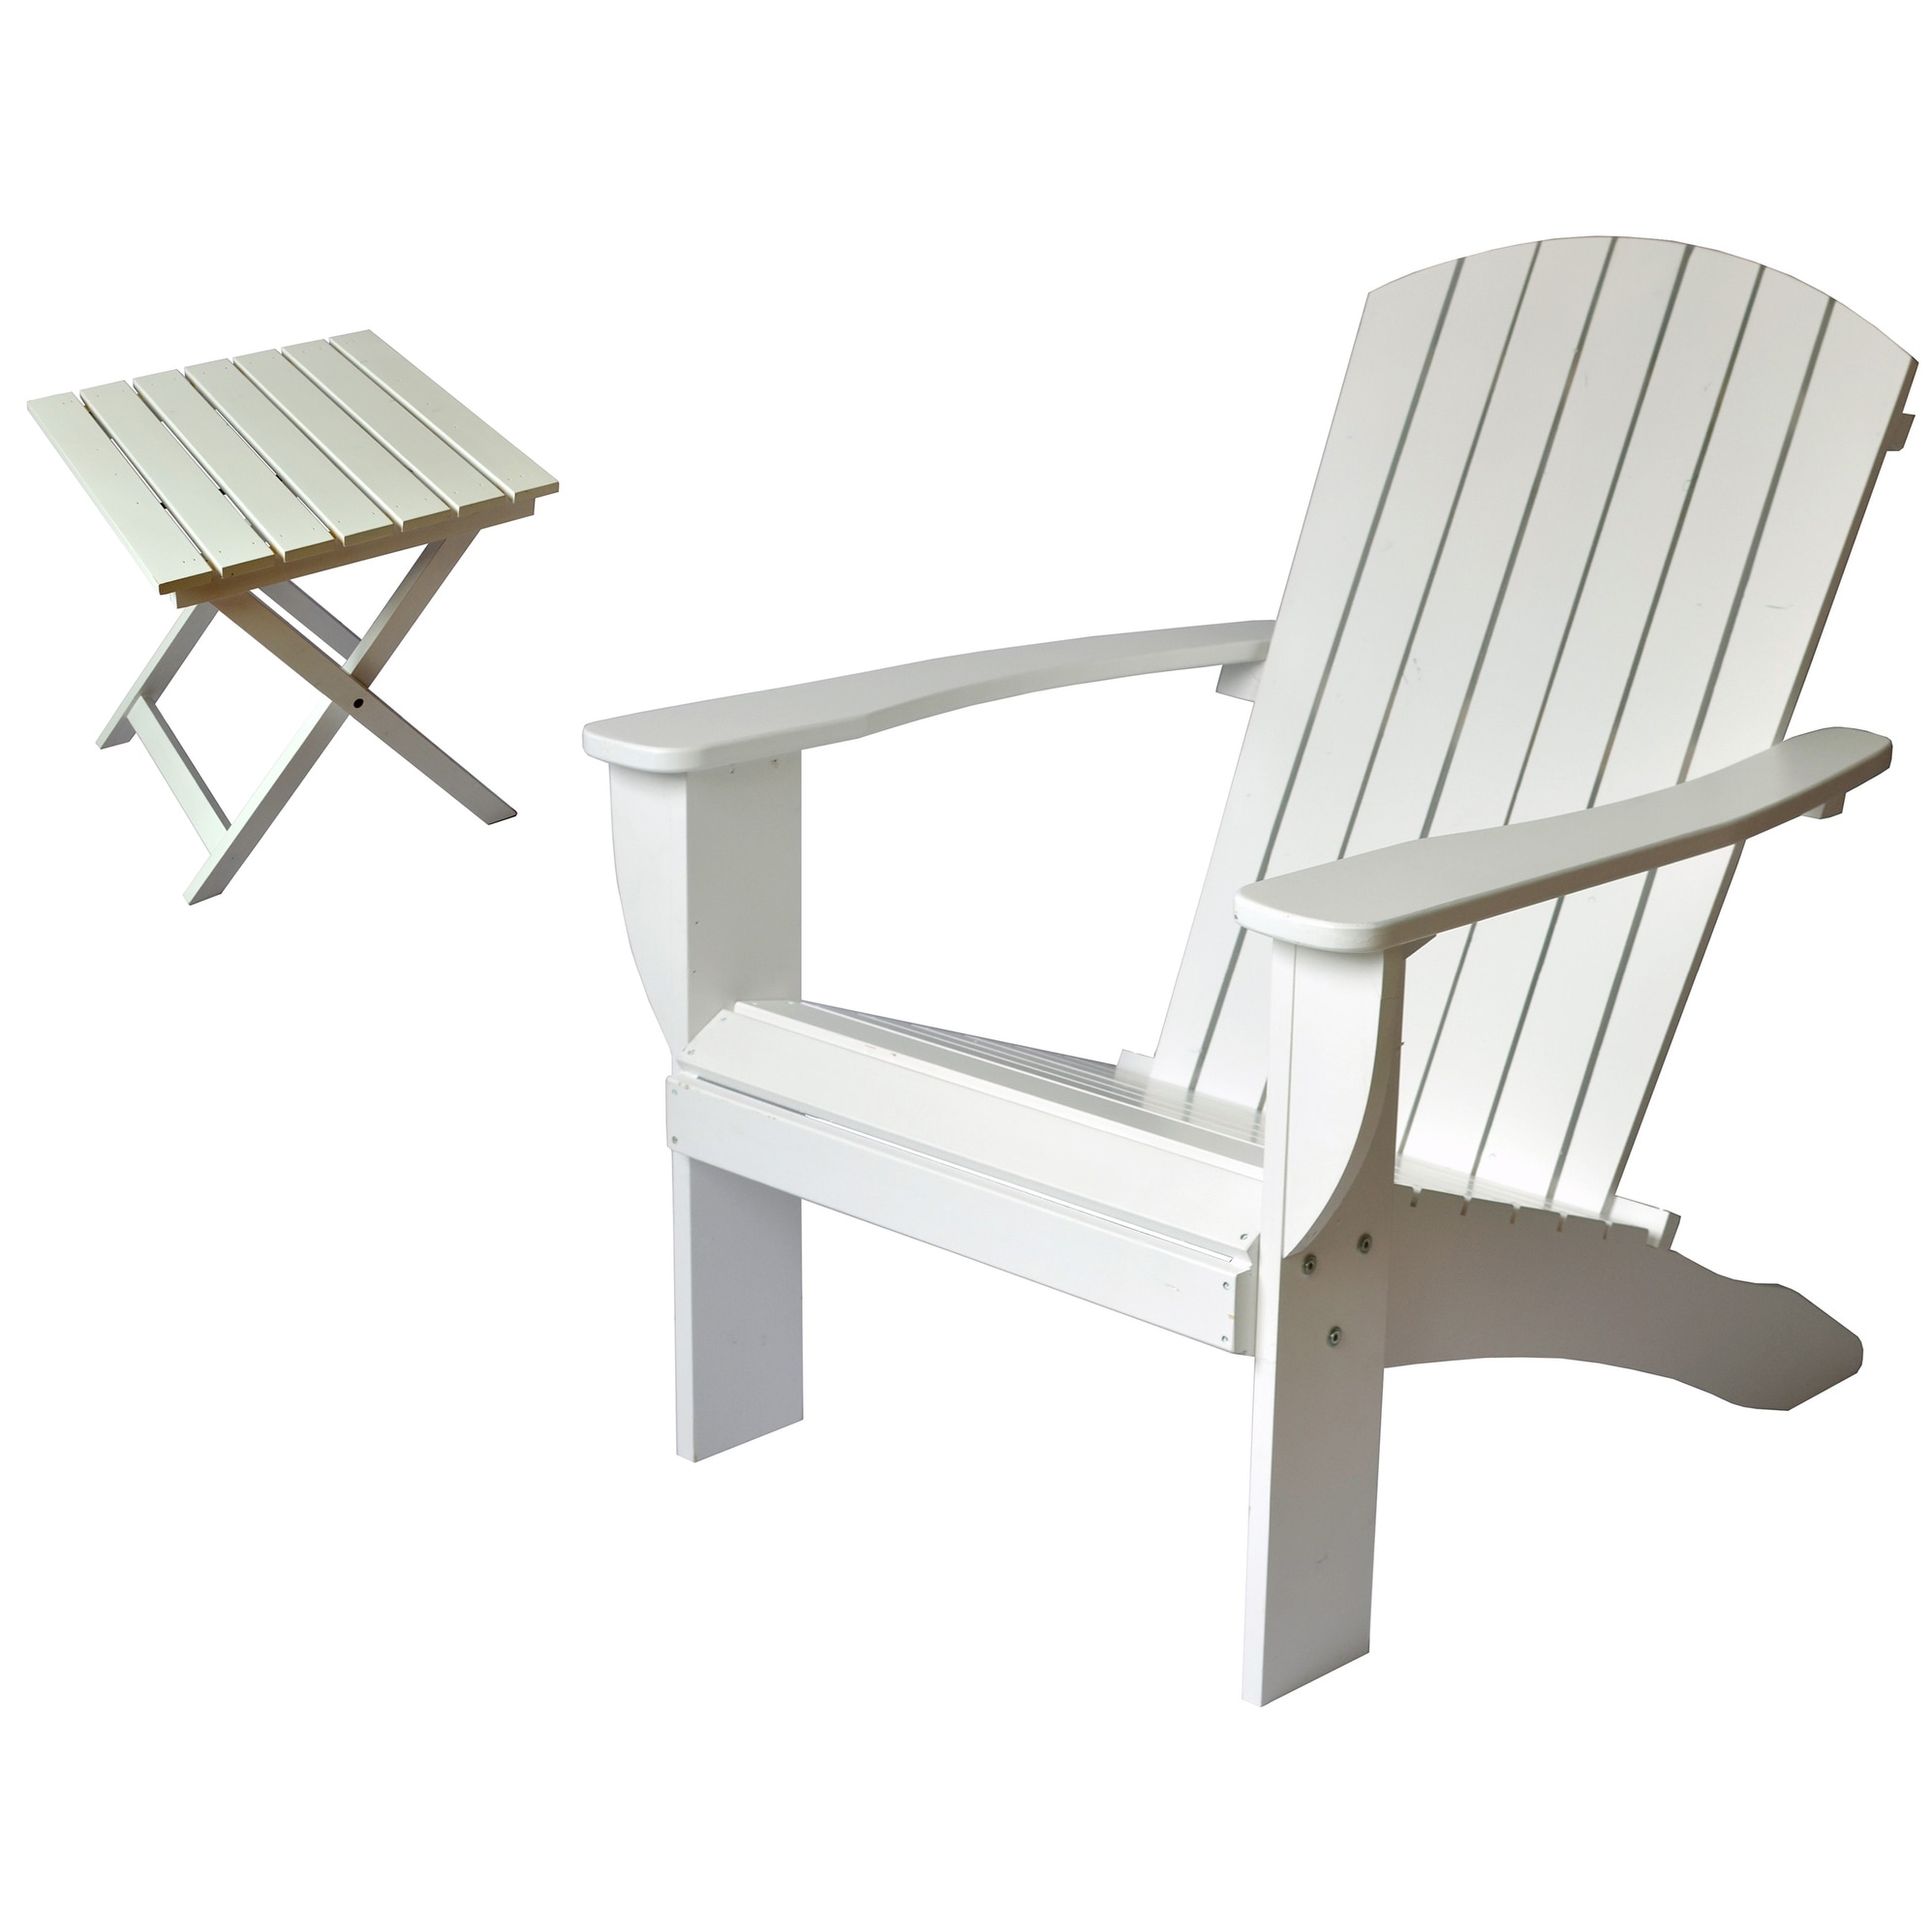 Riverstone Solid Cedar Adirondack Extra Wide Chair With Build In Bottle Opener and Matching Folding Table - White